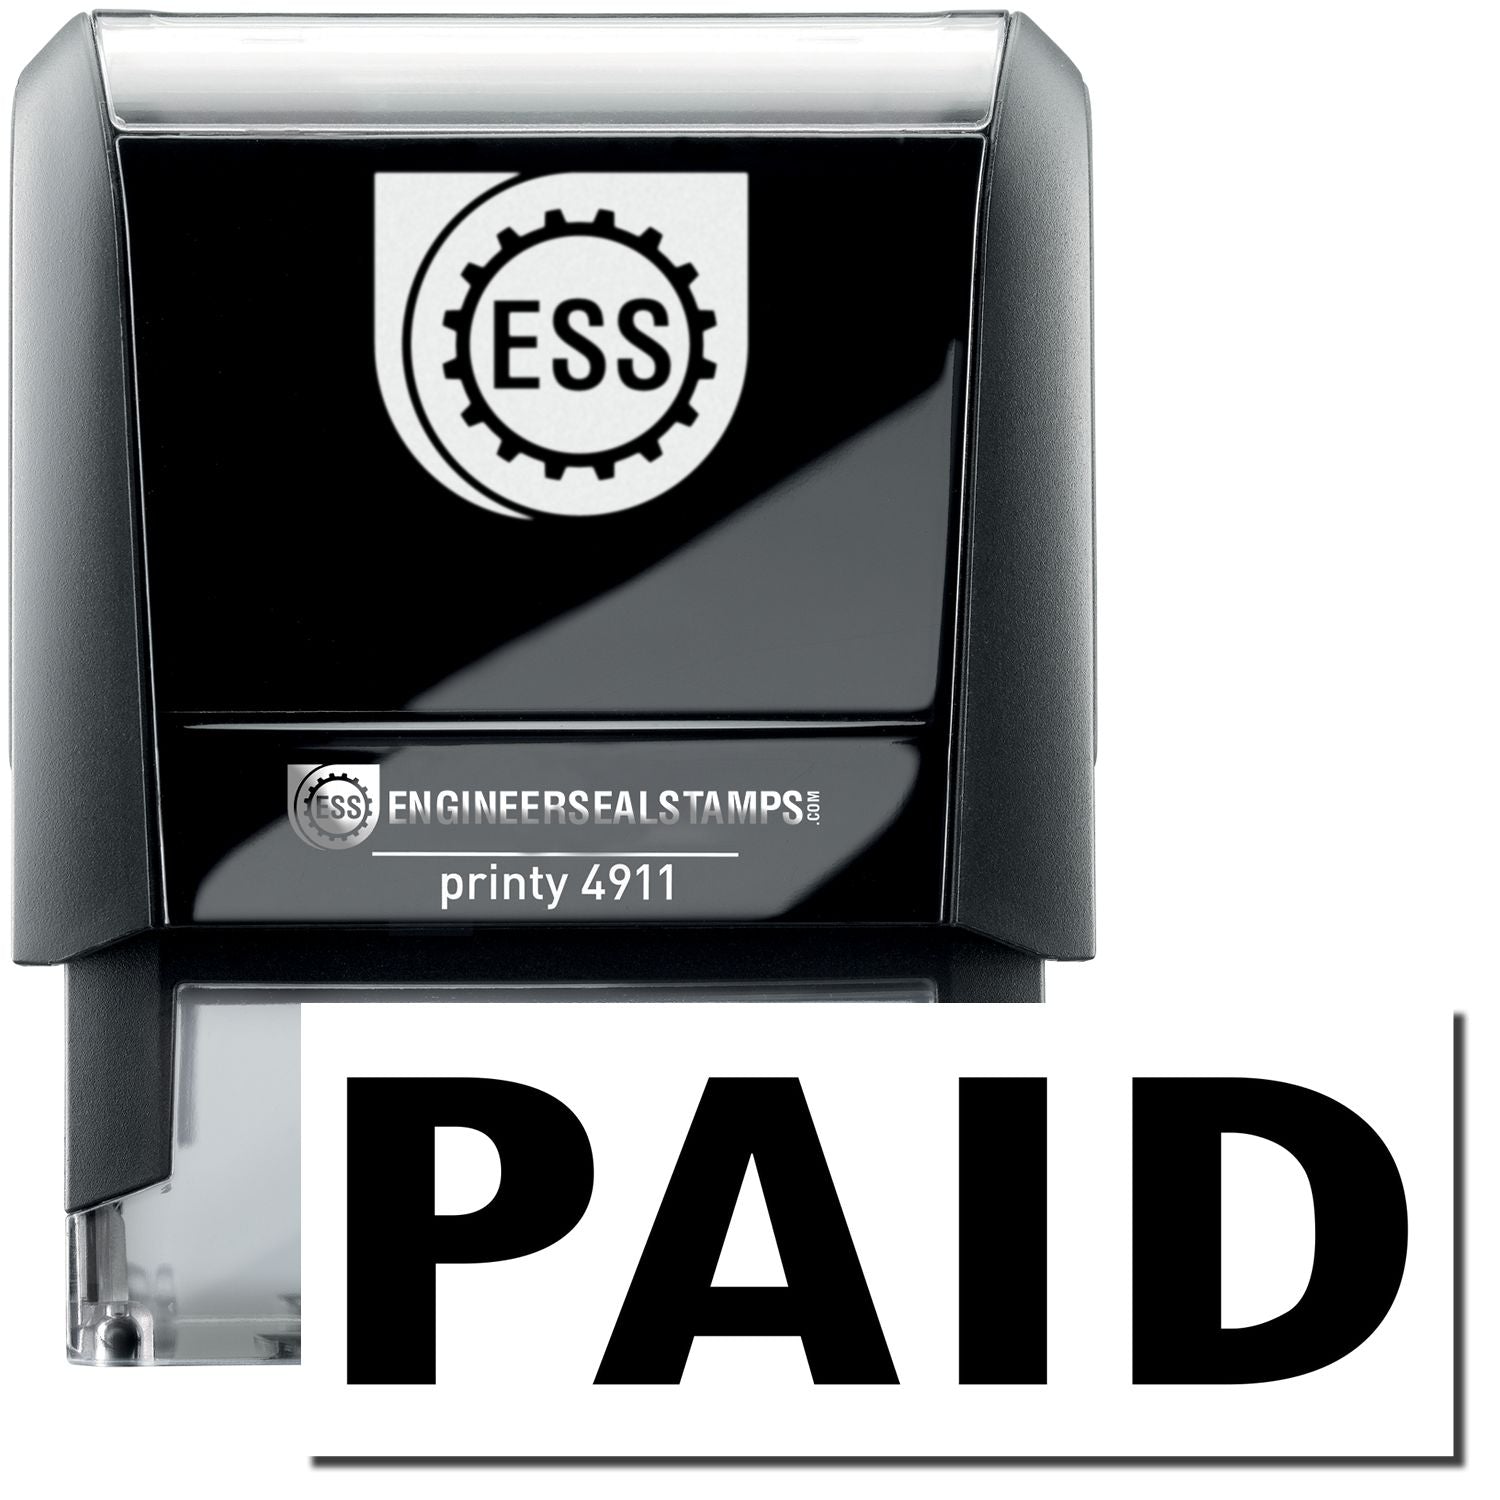 A self-inking stamp with a stamped image showing how the text "PAID" is displayed after stamping.